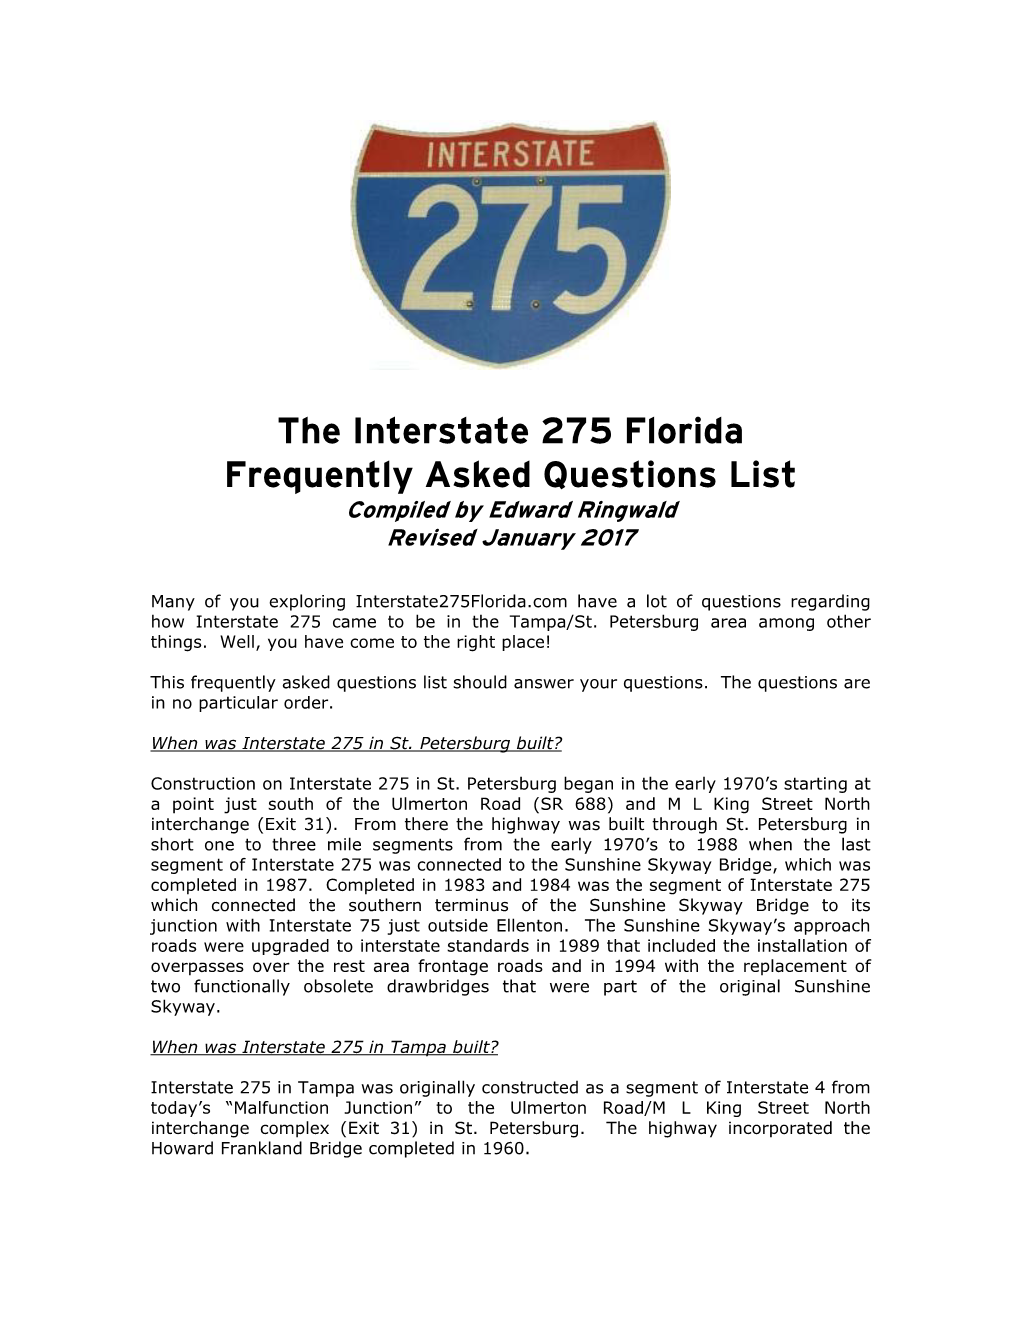 The Interstate 275 Florida Frequently Asked Questions List Compiled by Edward Ringwald Revised January 2017